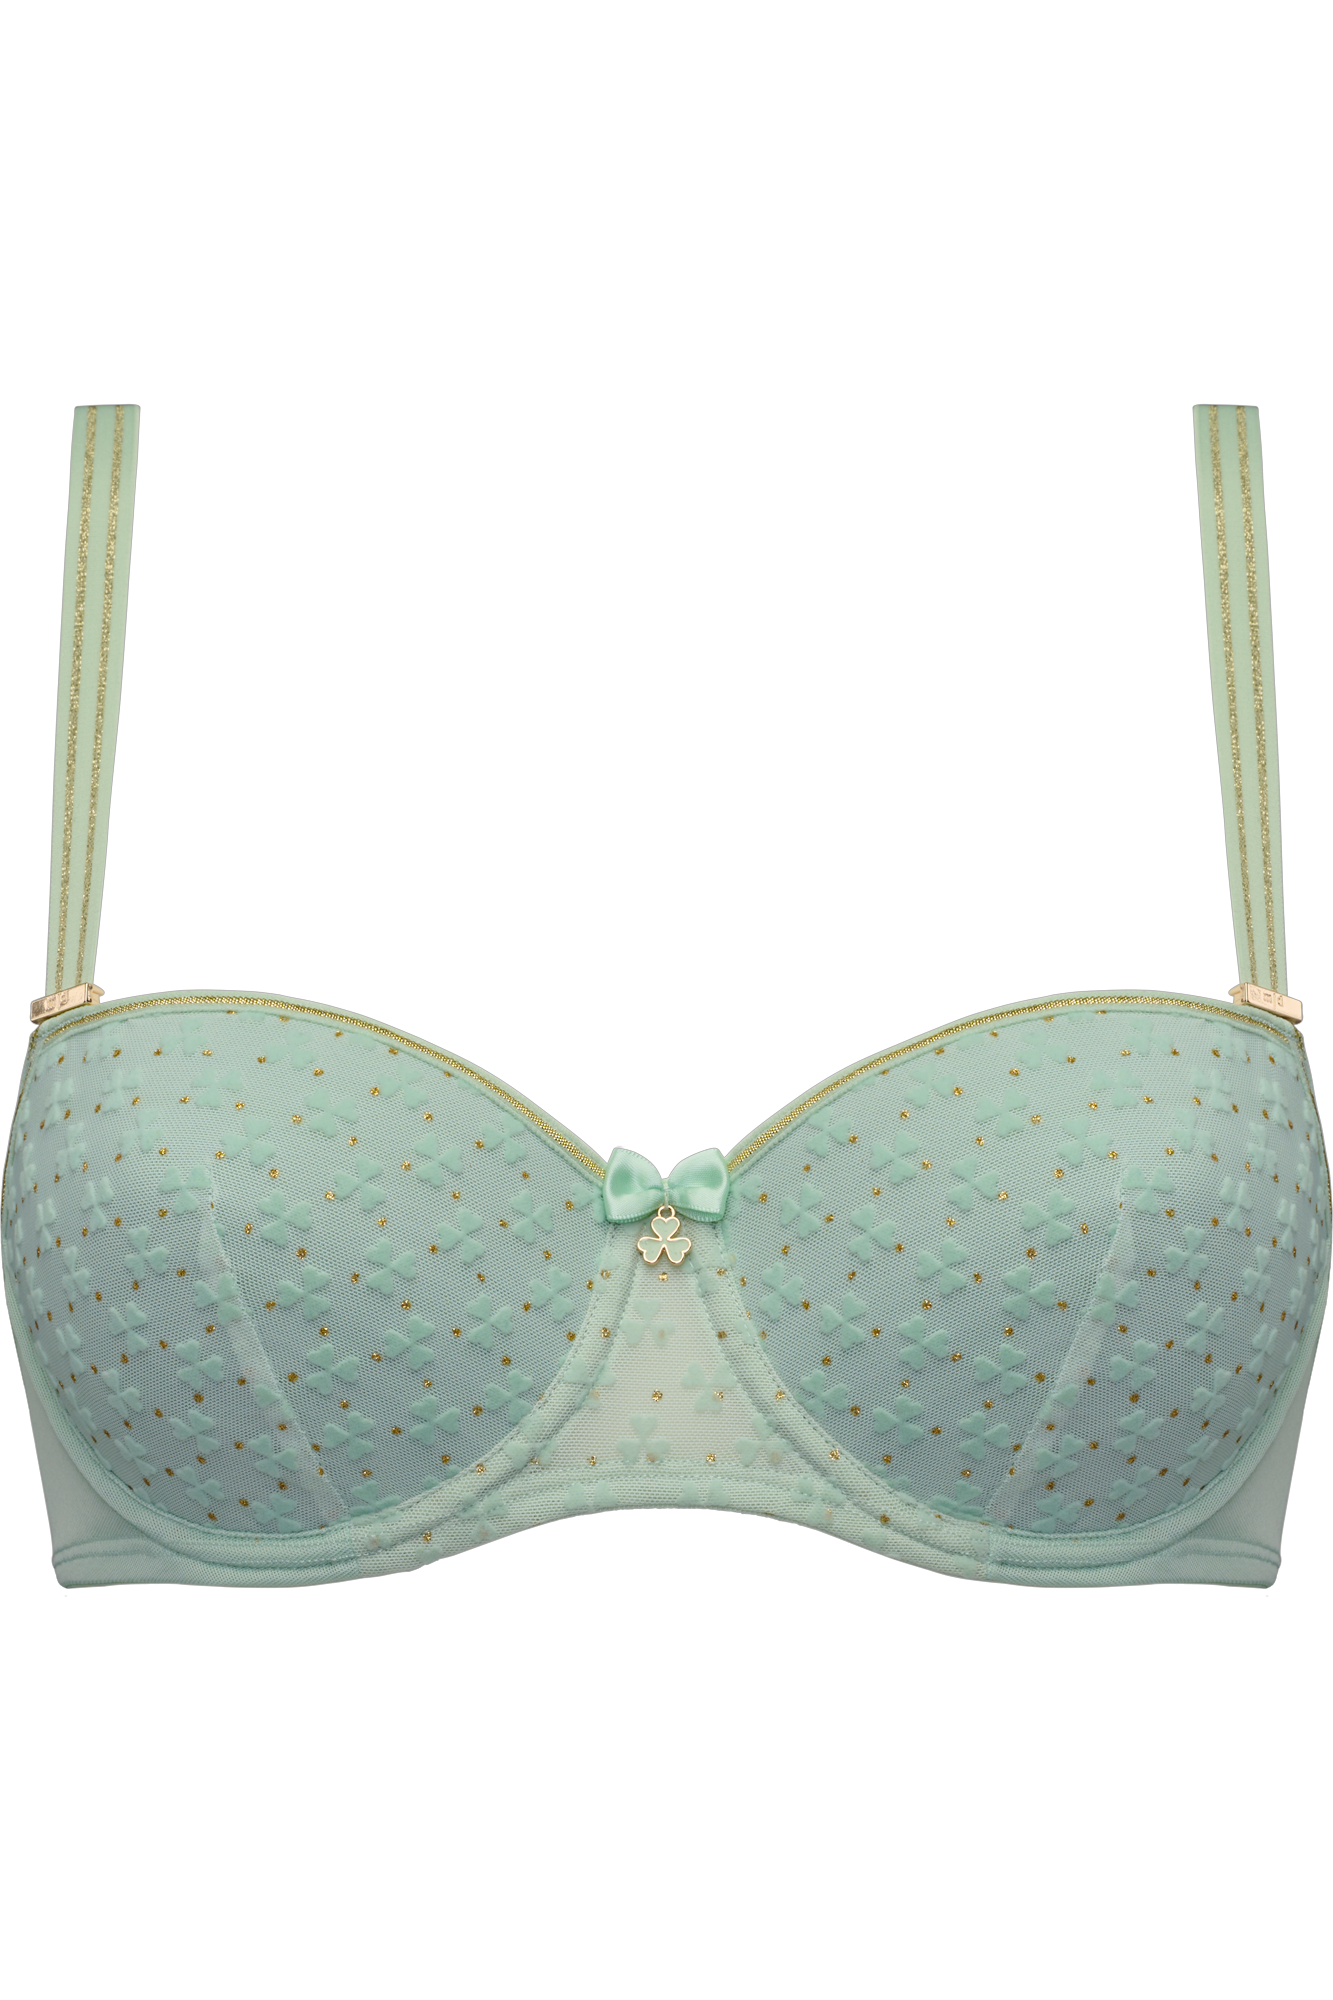 Marlies Dekkers lucky clover balconette bh wired padded green clover and gold